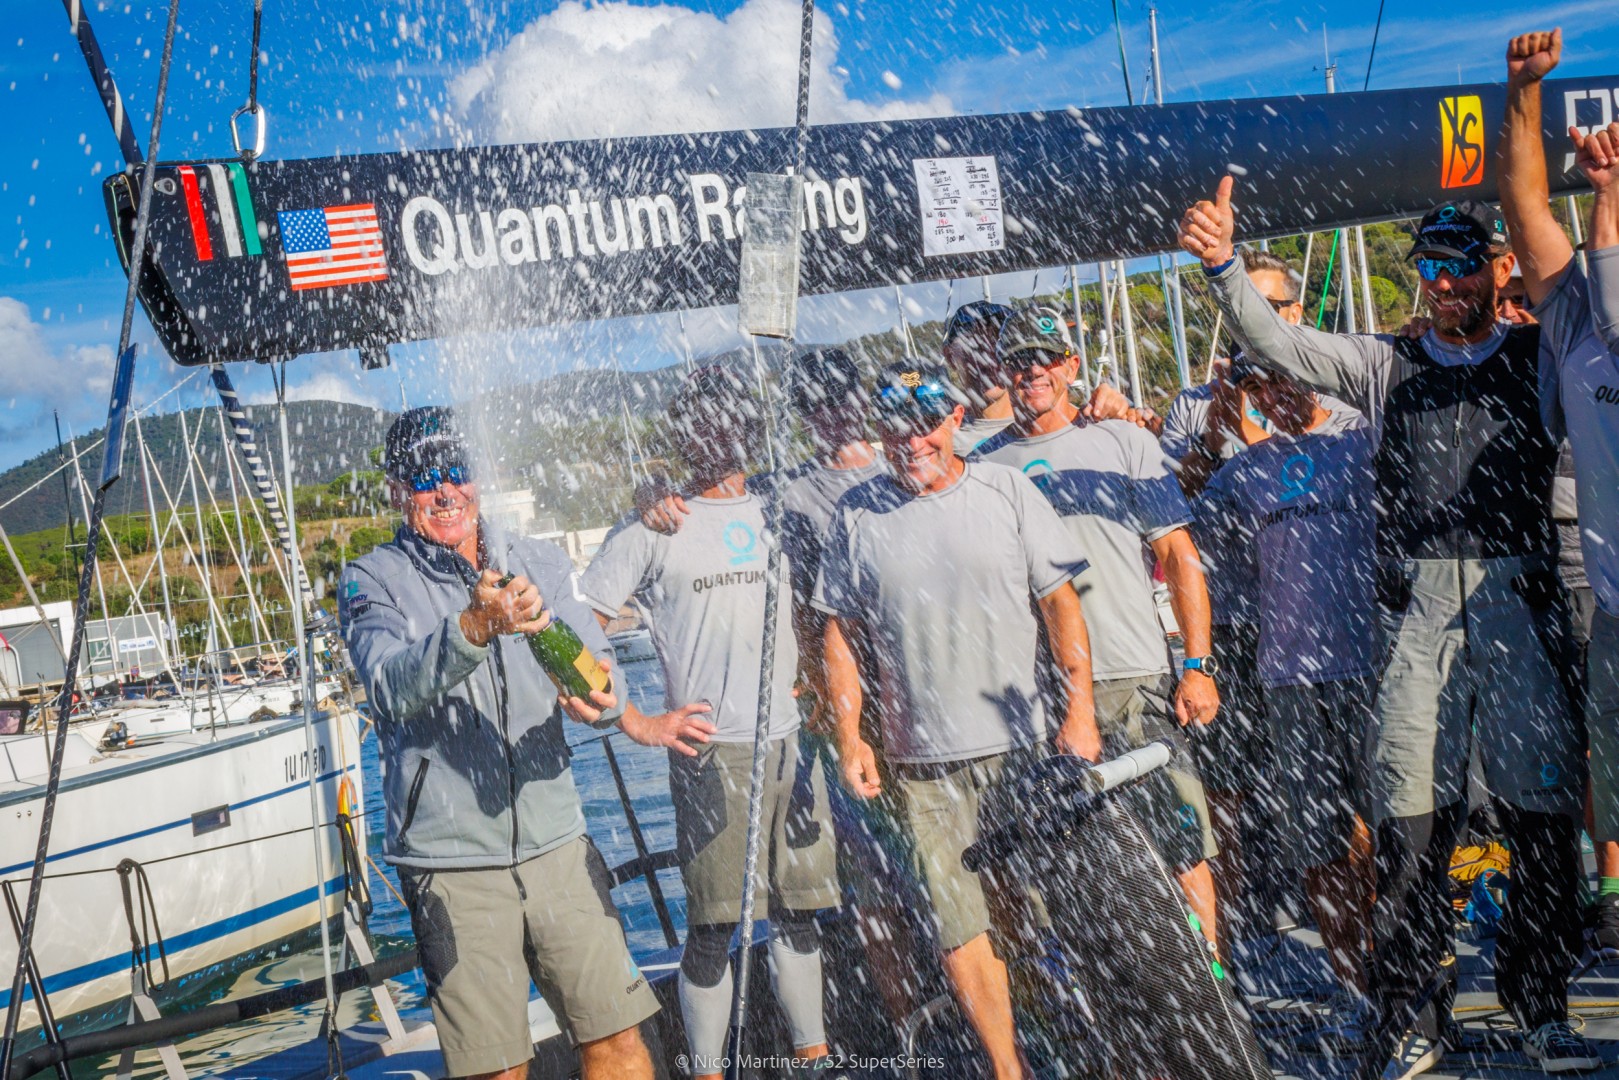 Quantum Racing are crowned Royal Cup champions in Scarlino, Italy